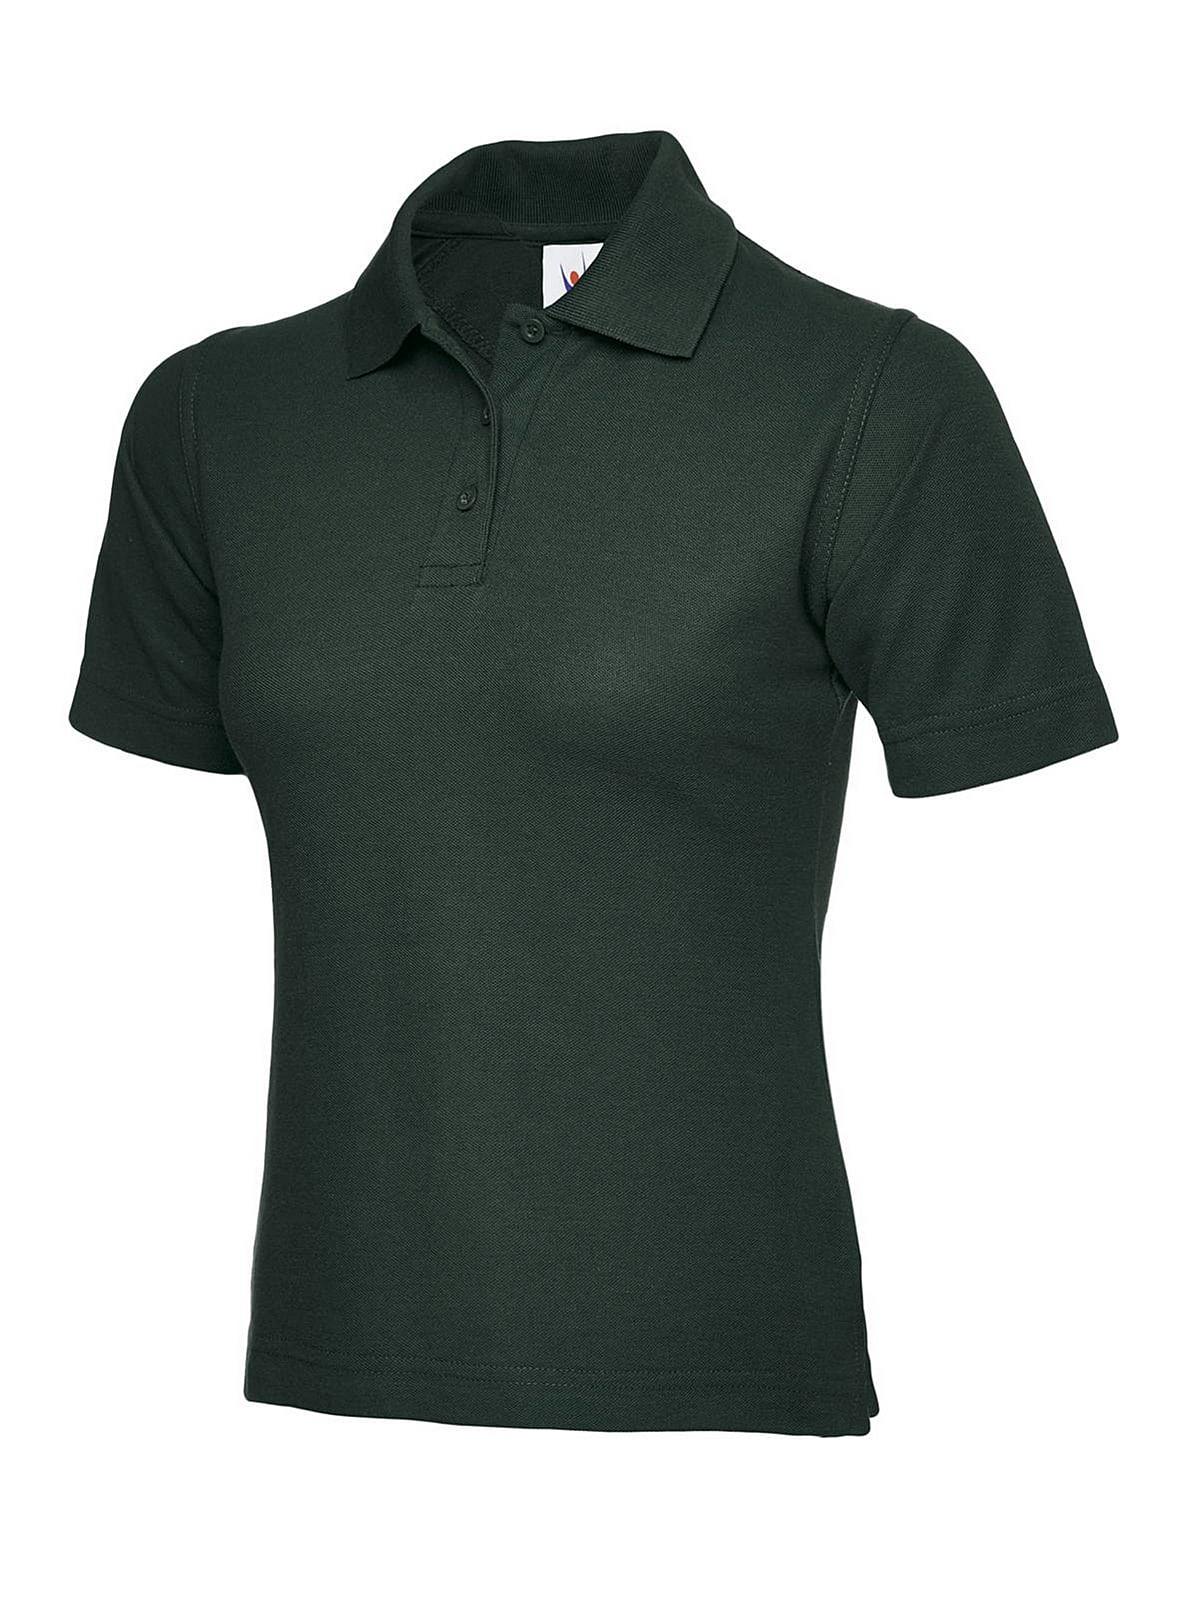 Uneek 220GSM Womens Polo Shirt in Bottle Green (Product Code: UC106)